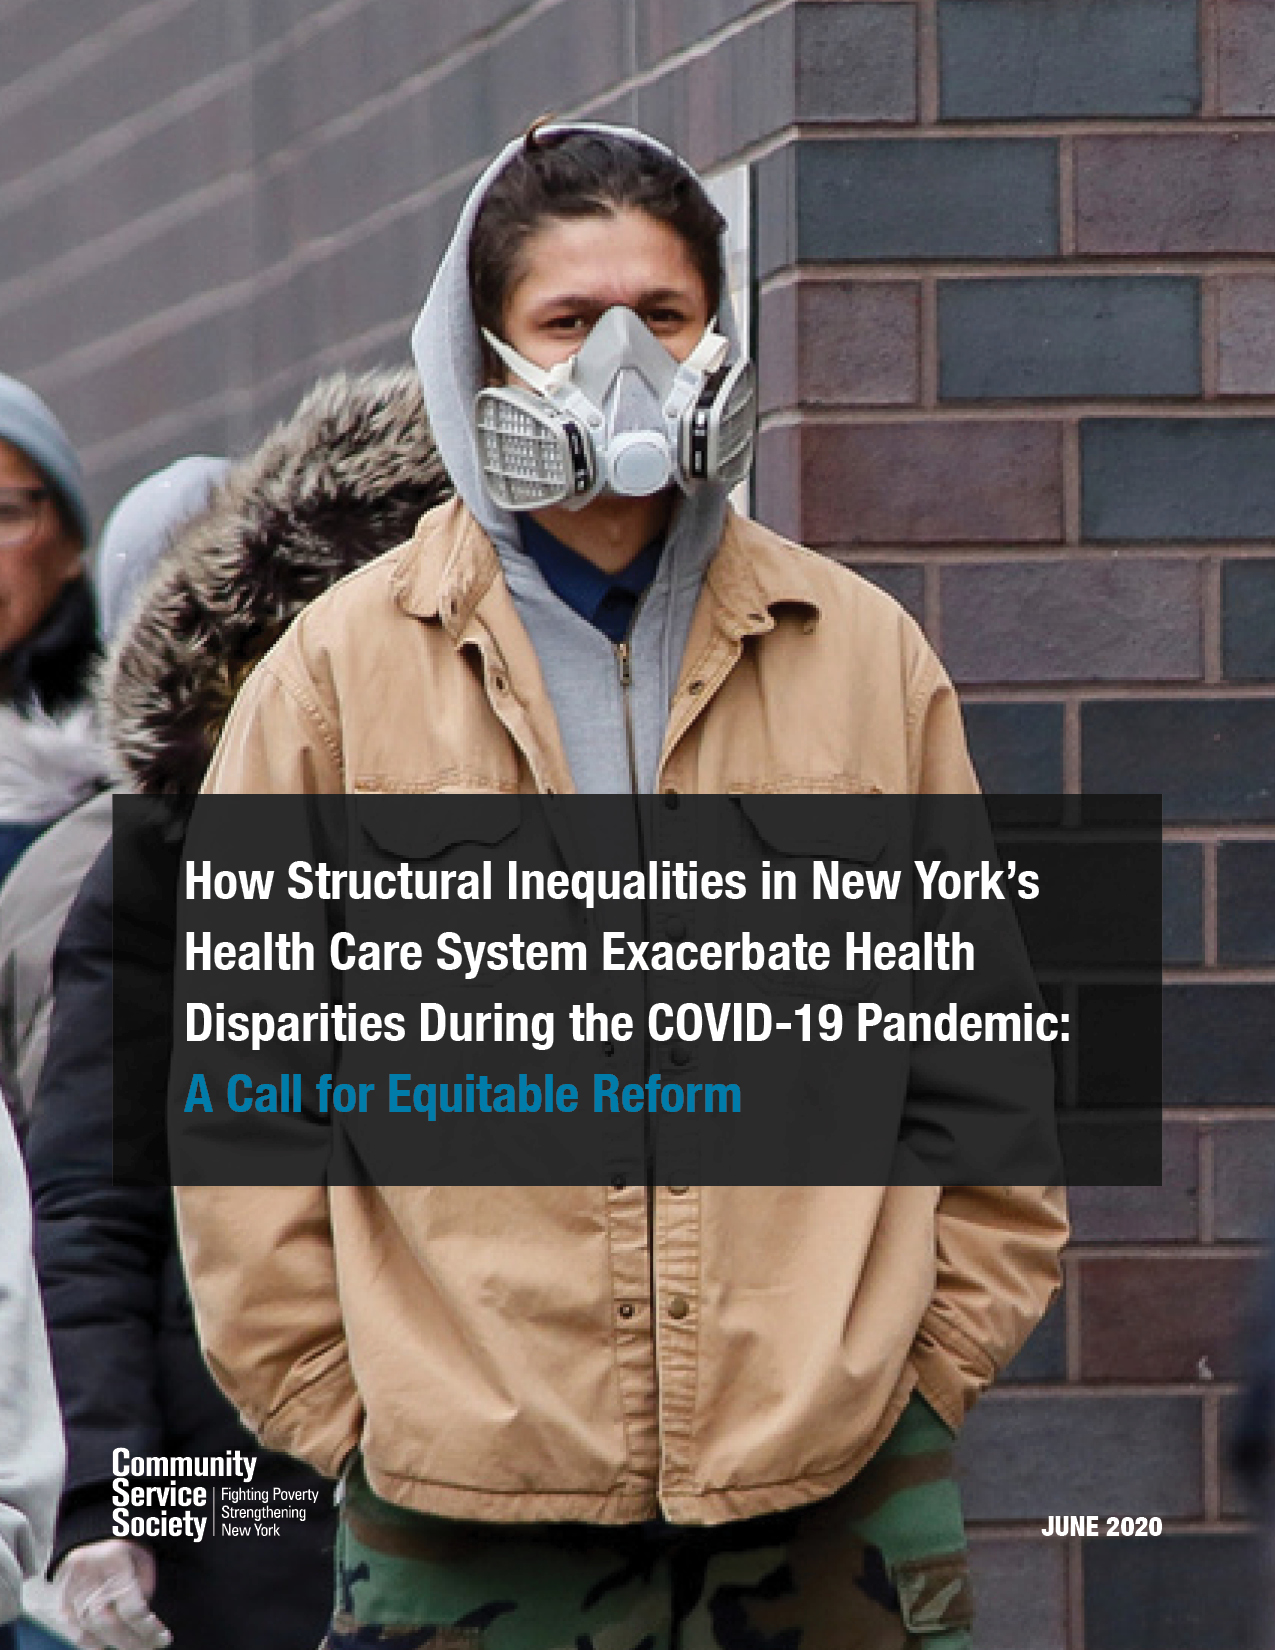 How Structural Inequalities in New York’s Health Care System Exacerbate Health Disparities During the COVID-19 Pandemic: A Call for Equitable Reform